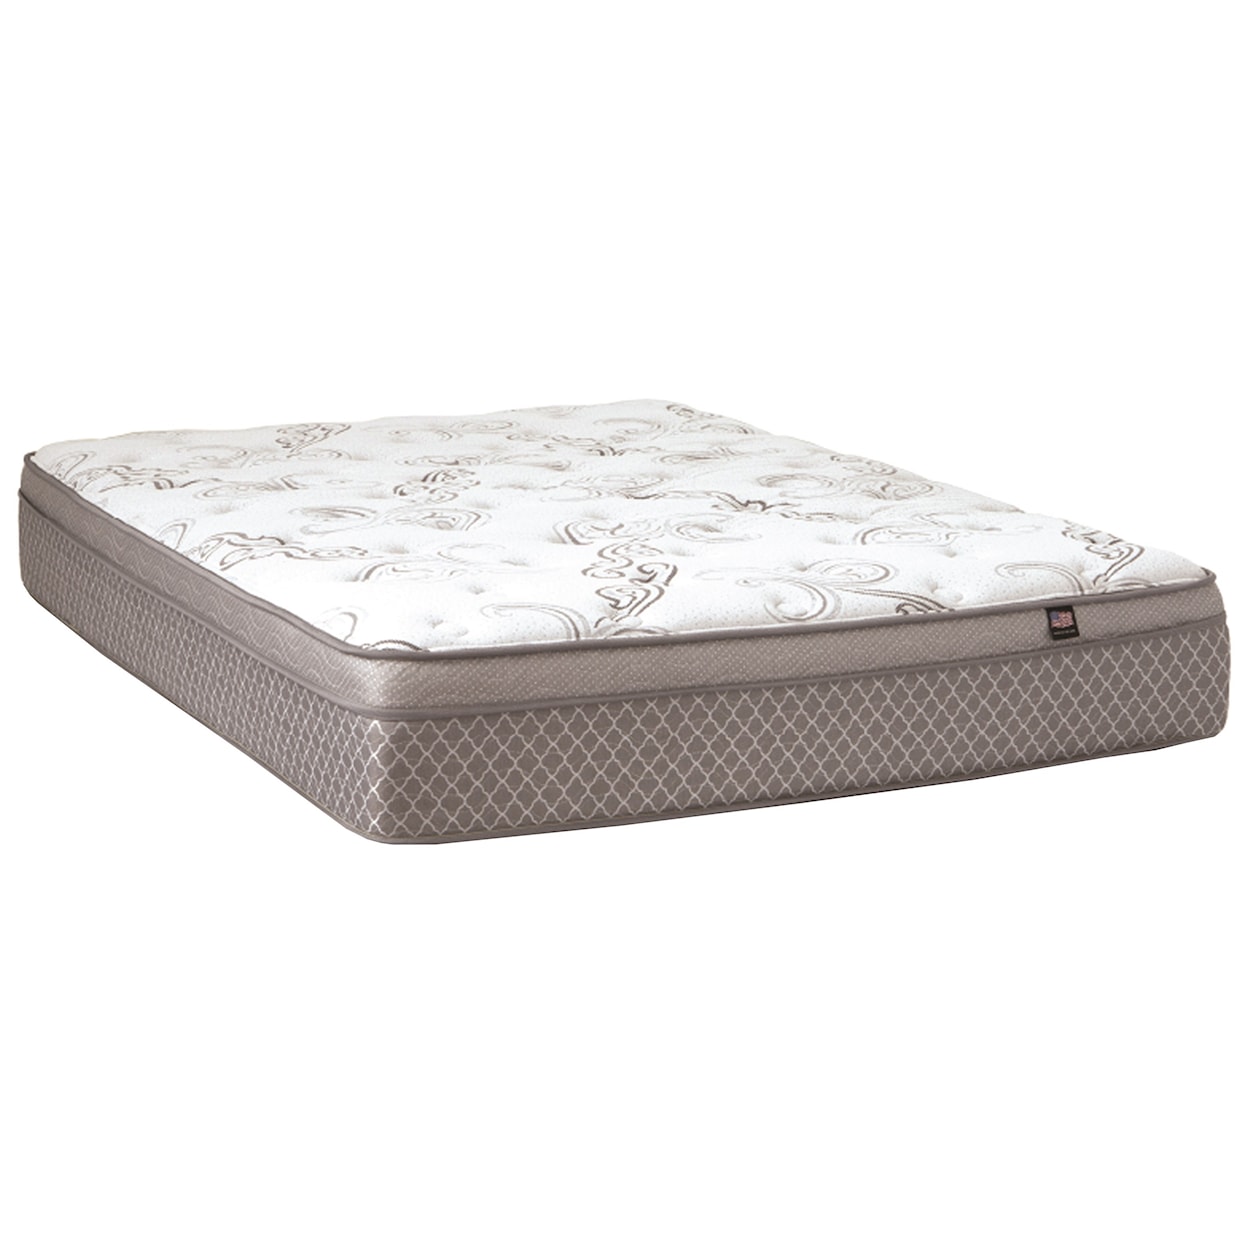 Therapedic Park Avenue Luxury Firm ET Cal King Luxury Firm Euro Top Mattress